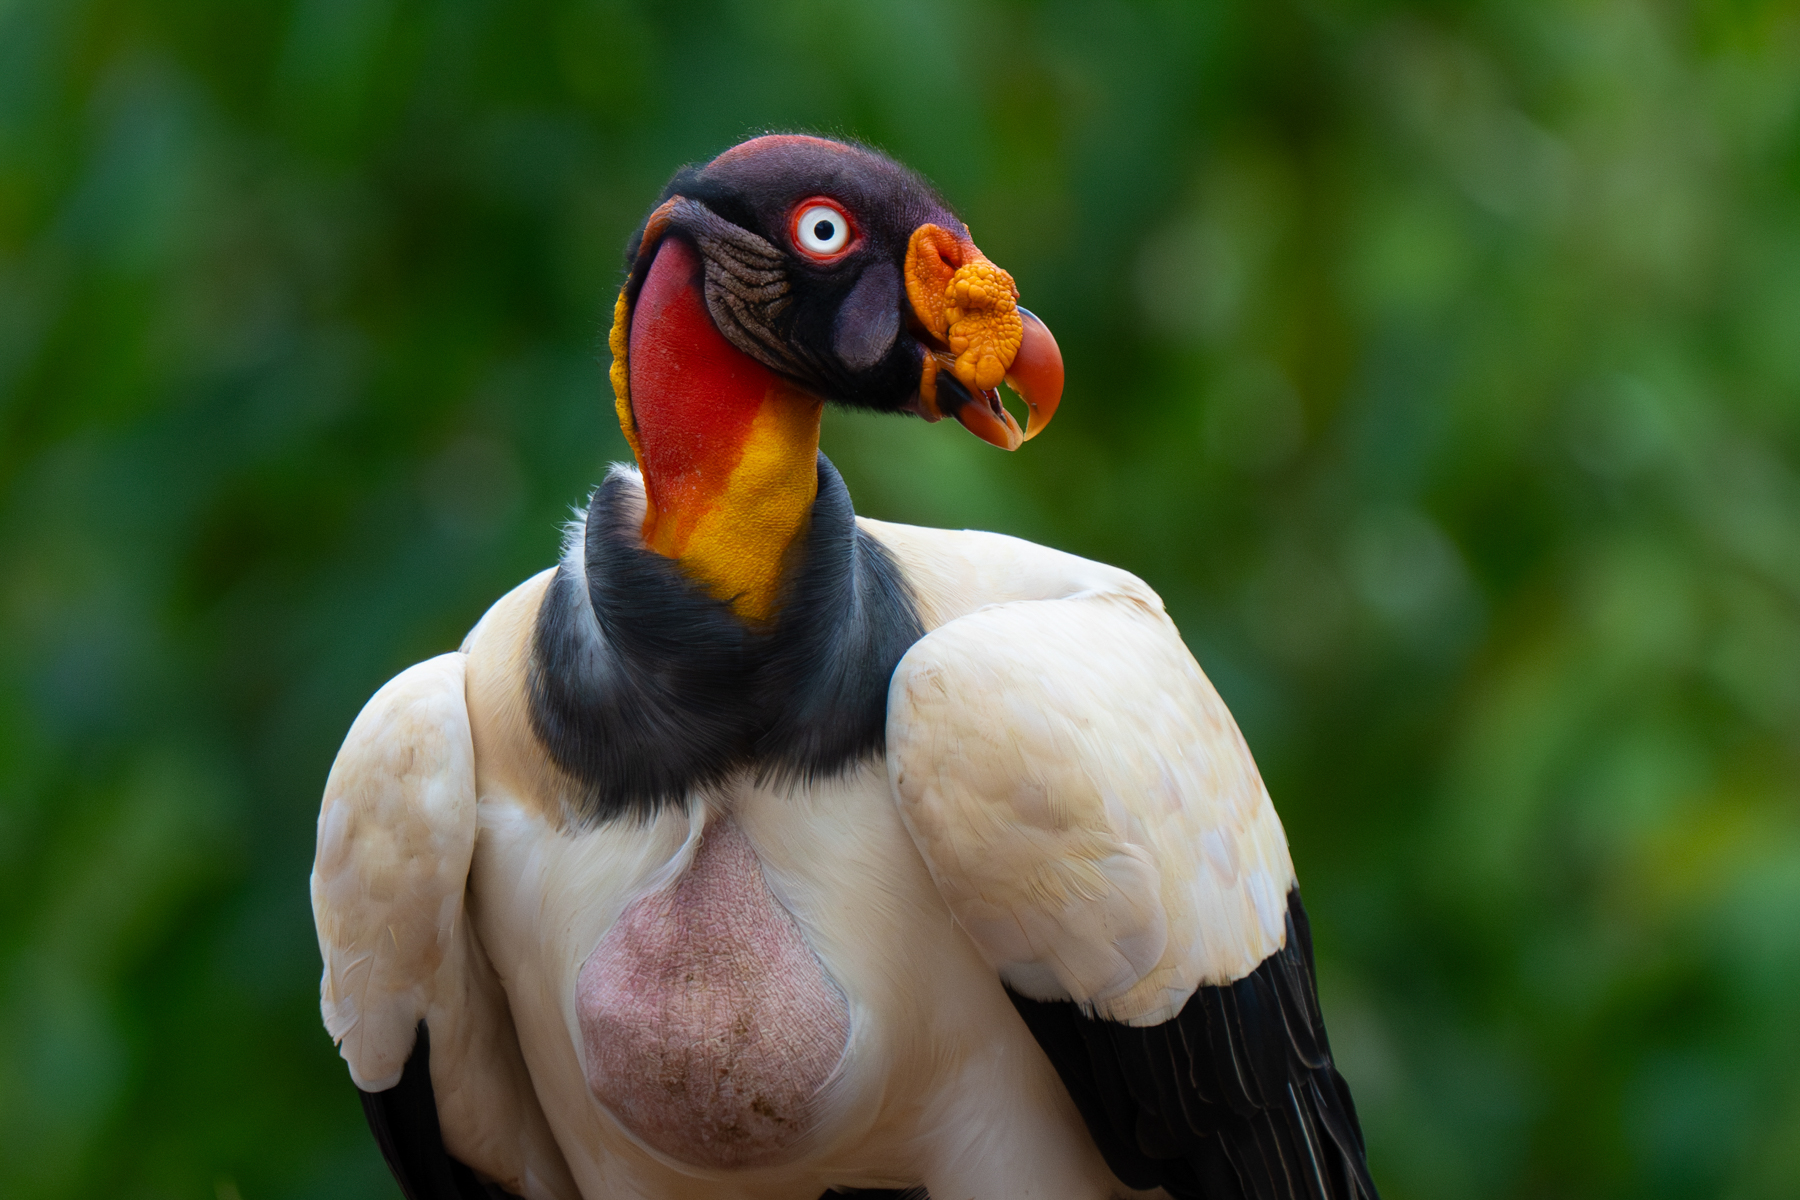 King Vultures would have to be the most beautiful vultures in the world (image by Inger Vandyke)